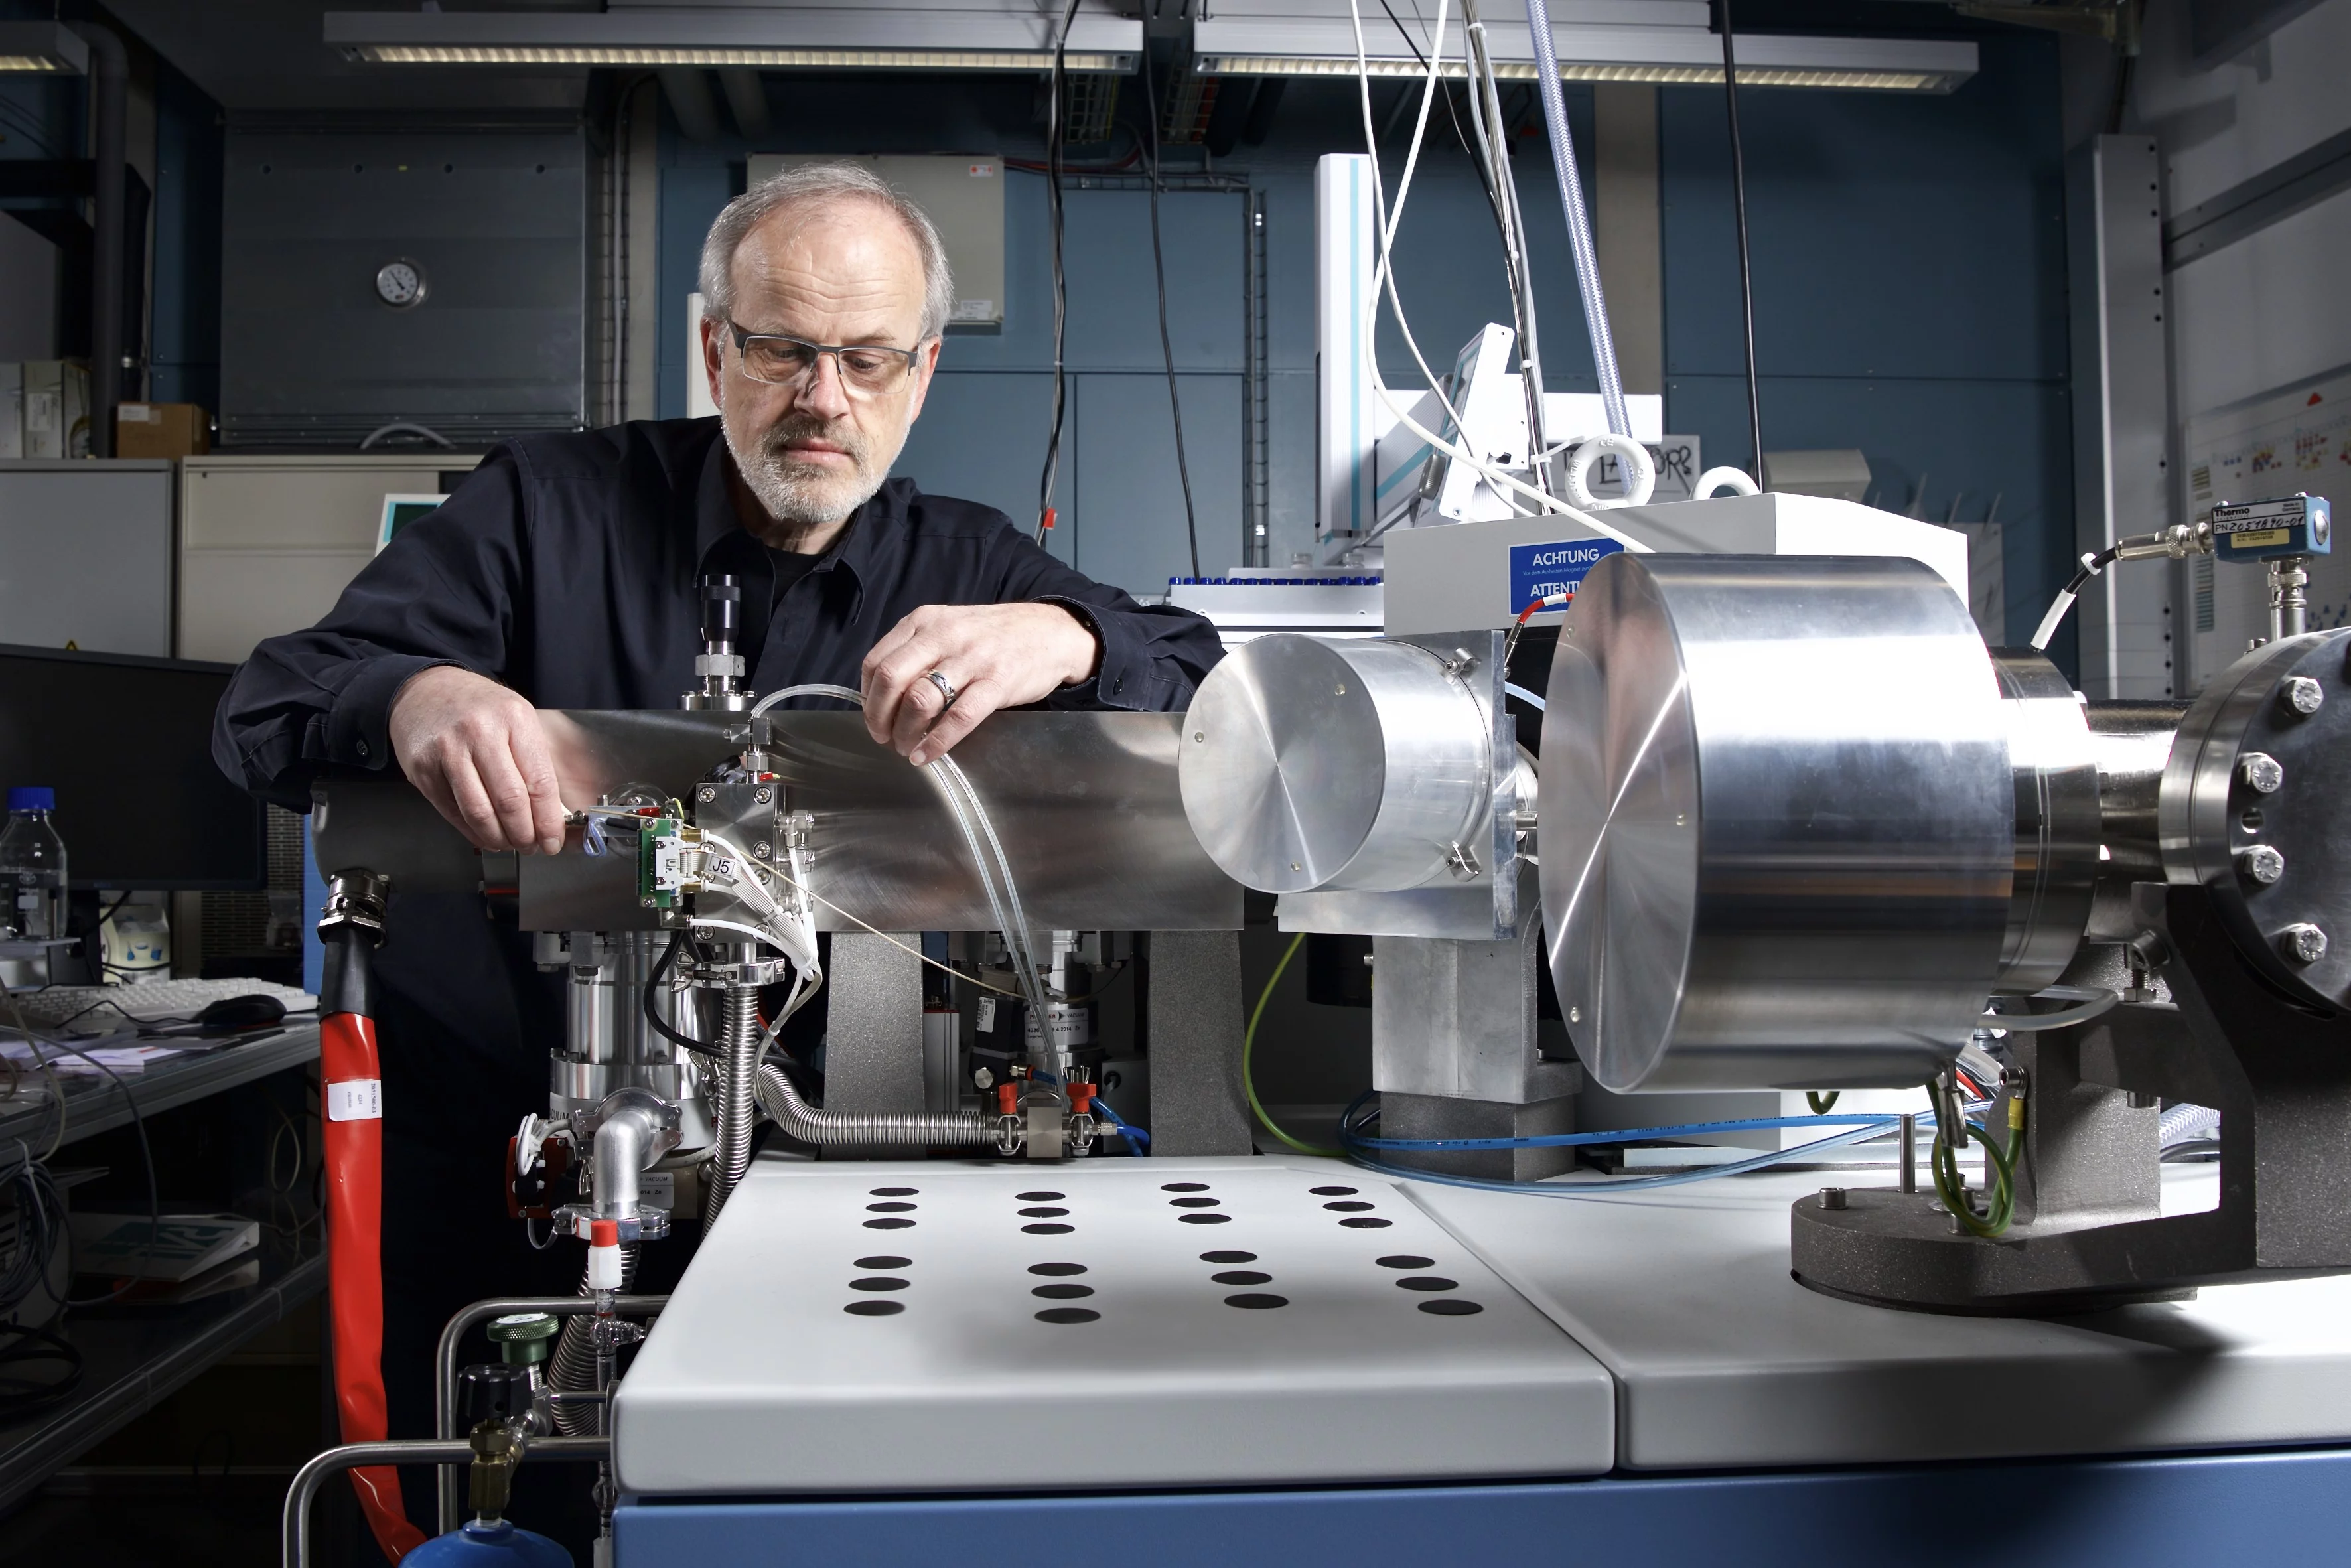 Dr Rolf Siegwolf, head of the Ecosystem Fluxes Group, at a atomic mass spectrometer at the Paul Scherrer Institute. (Photo: Paul Scherrer Institute/Markus Fischer)